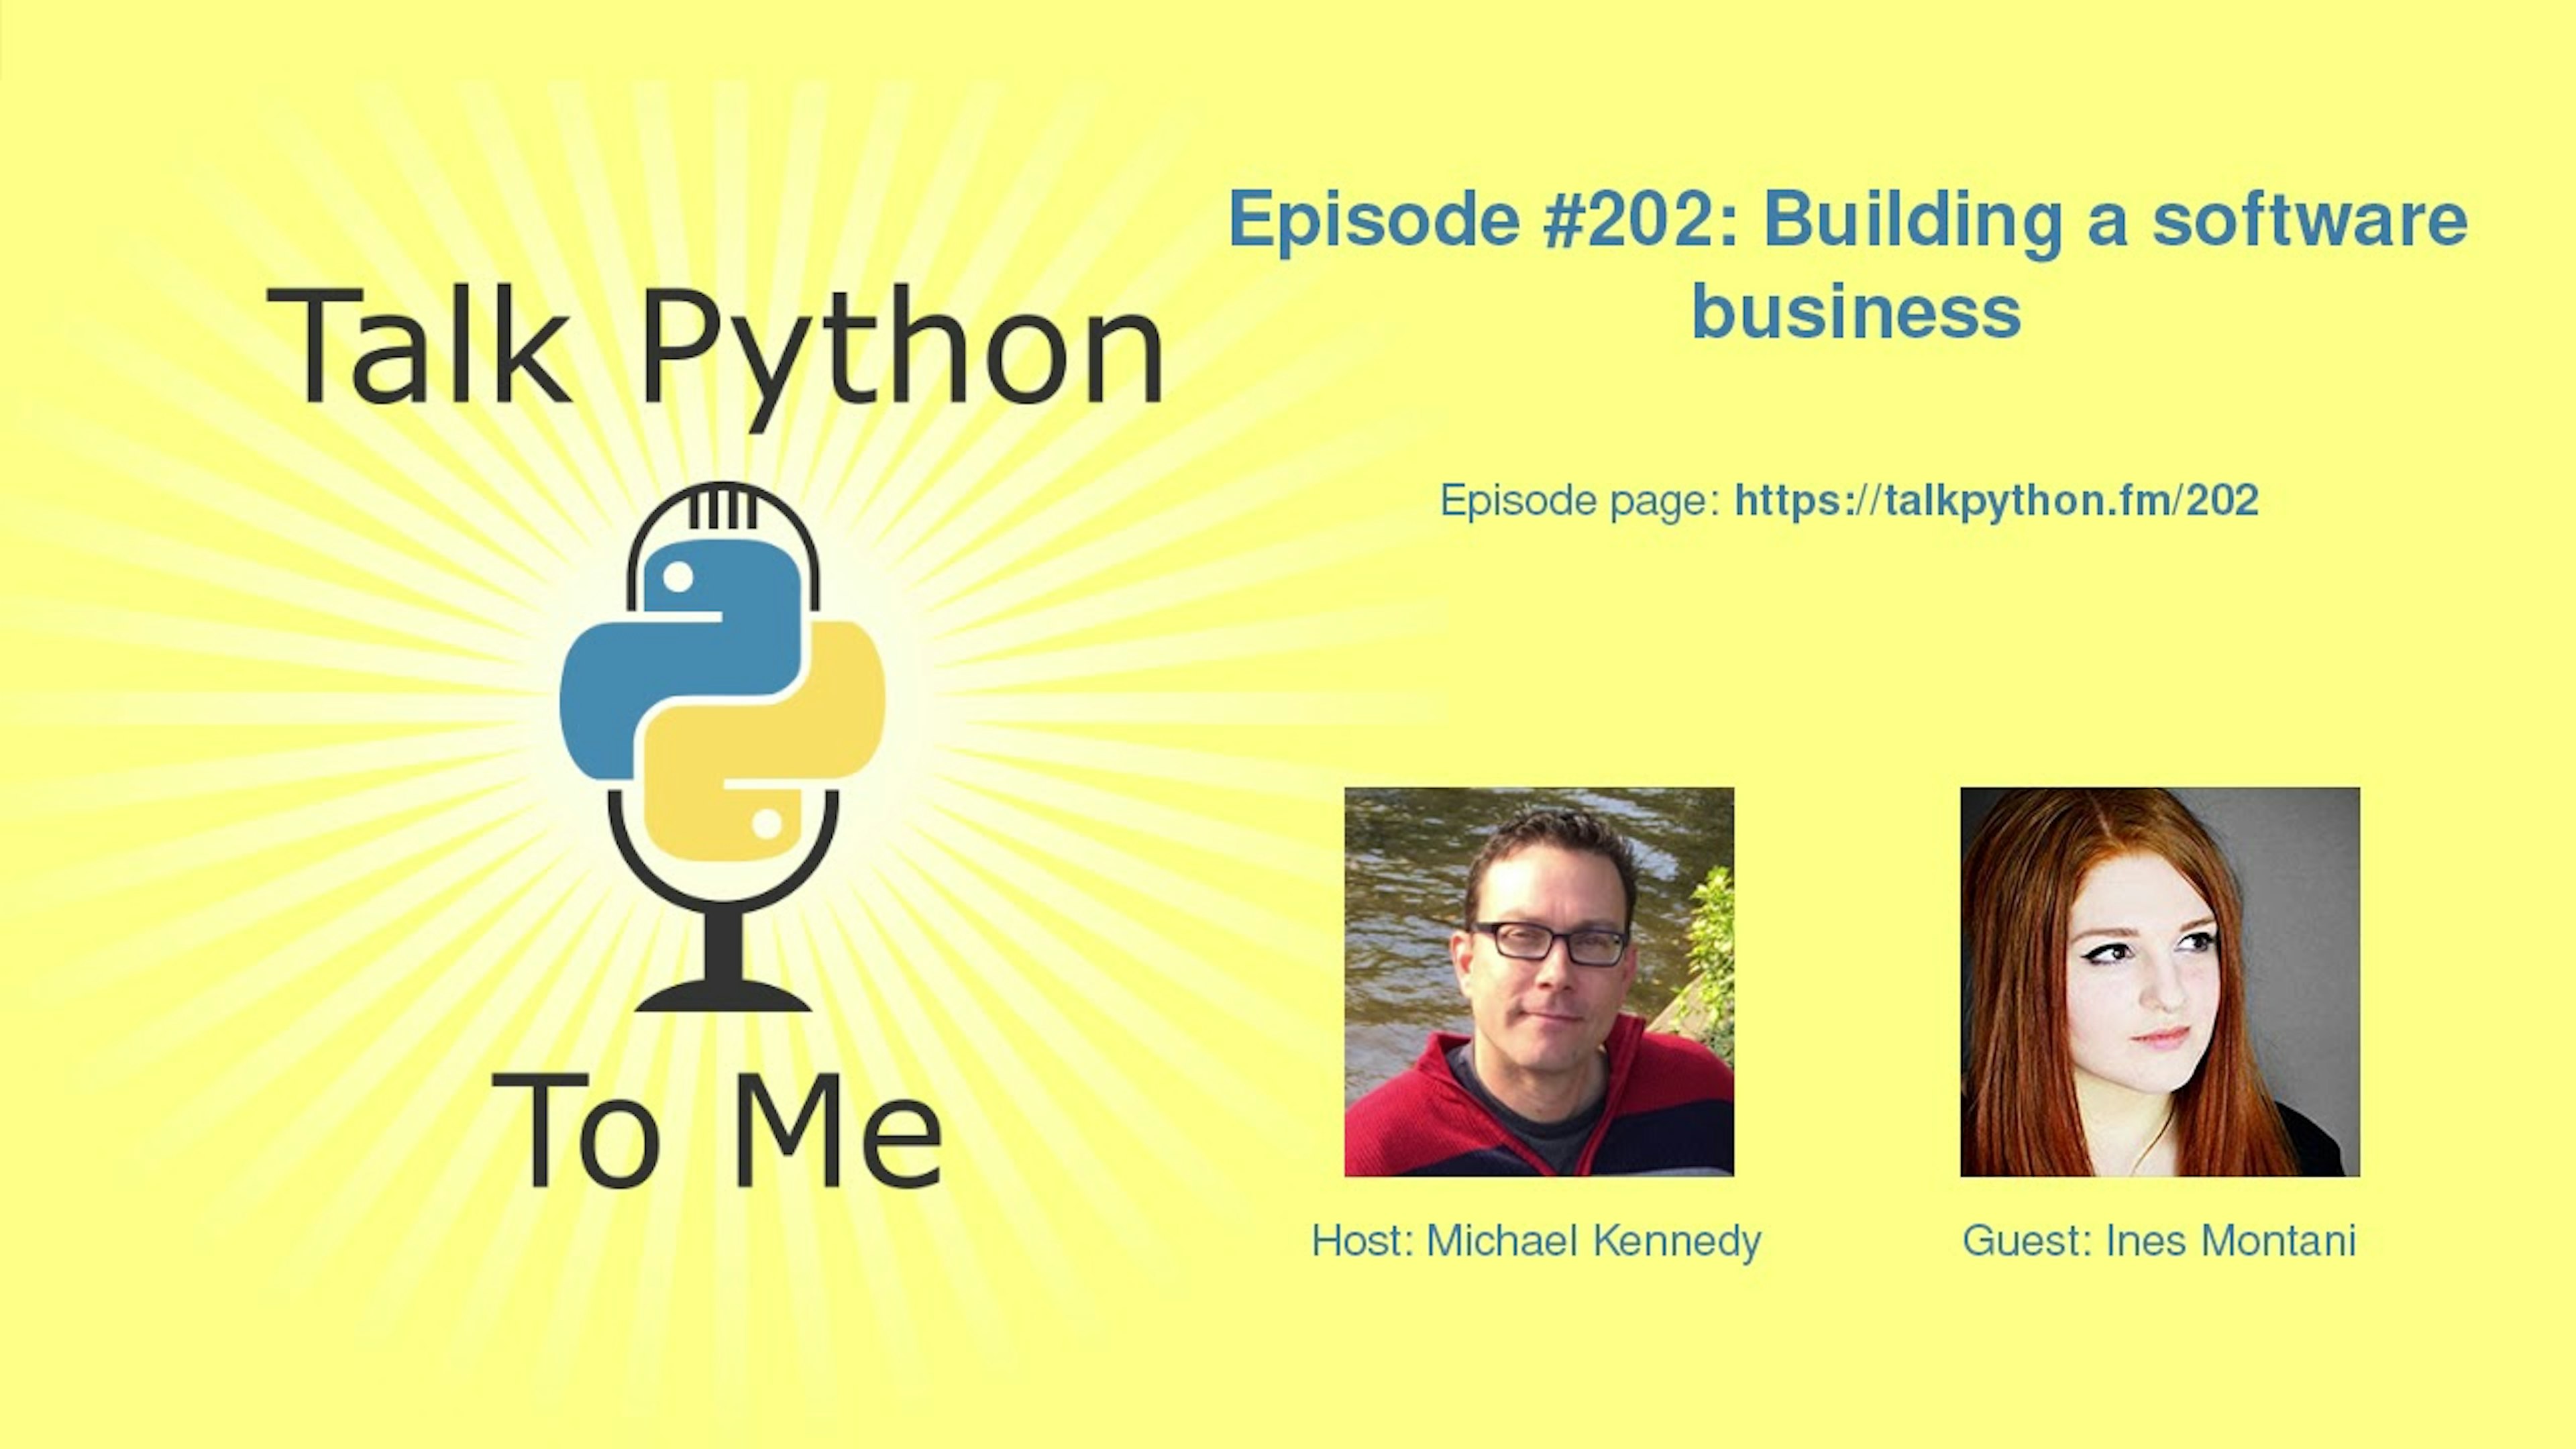 Building a software business with Python